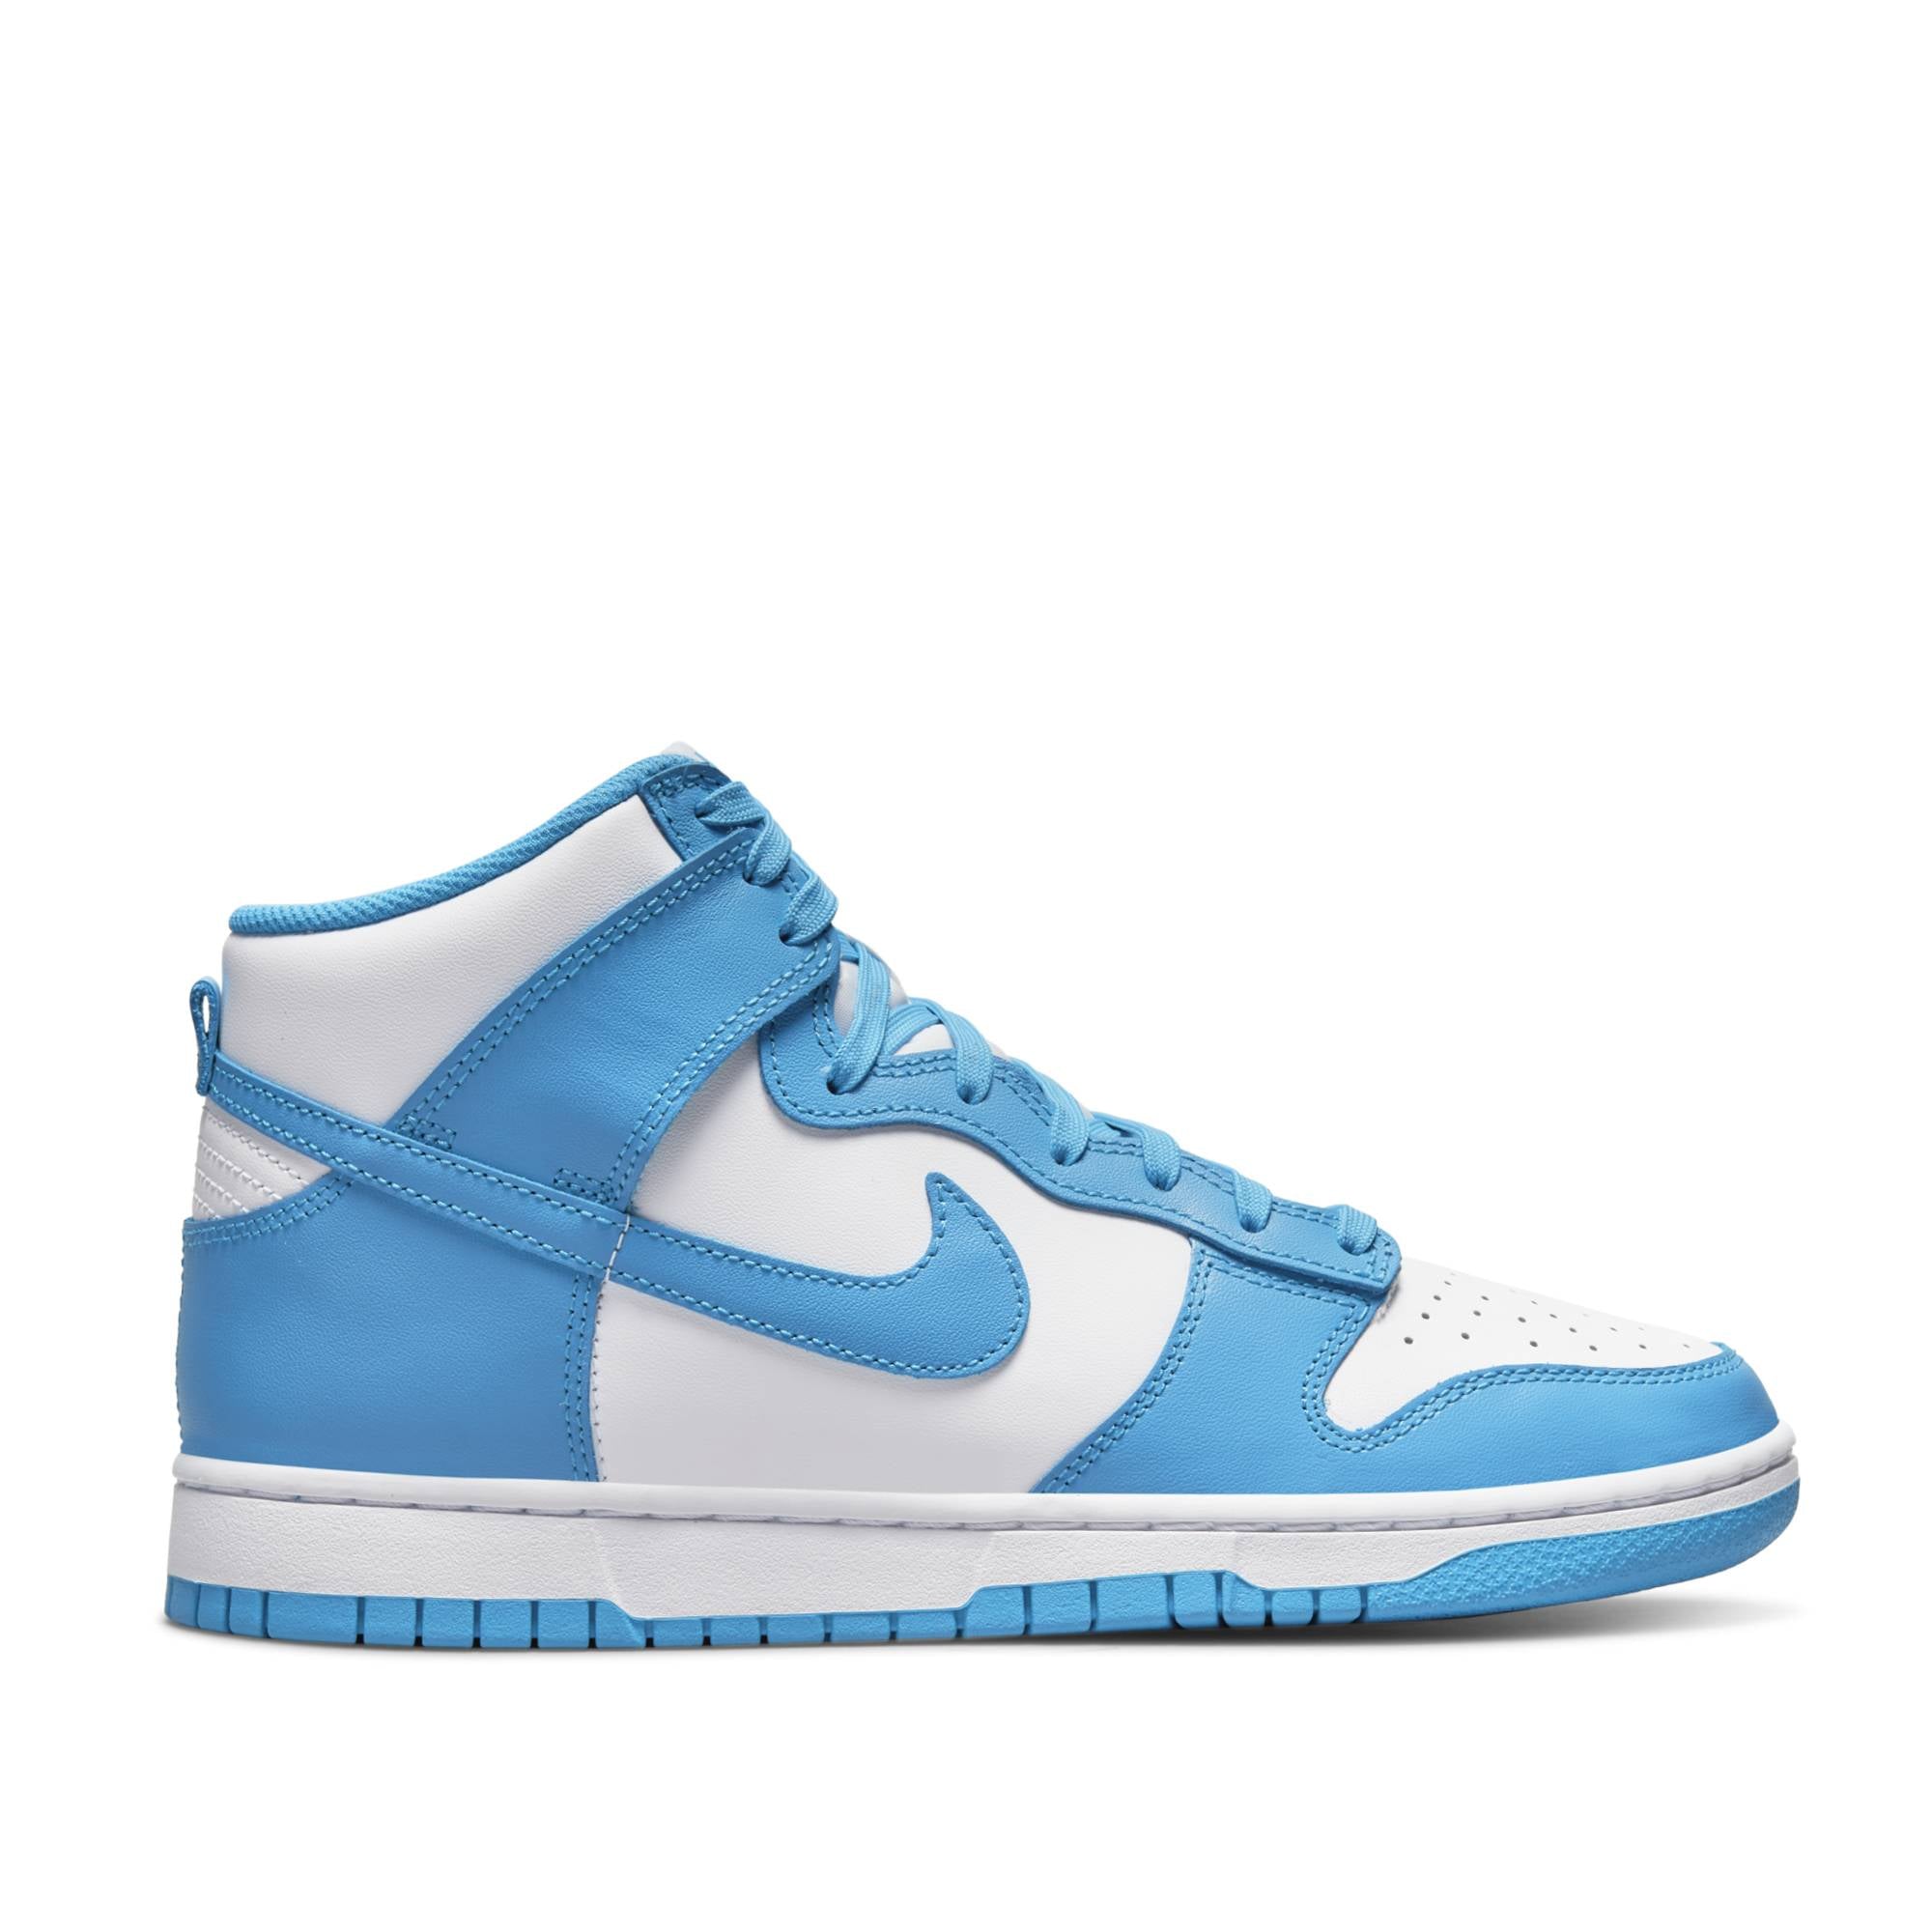 Nike Dunk High ’Laser Blue’ Sneakers